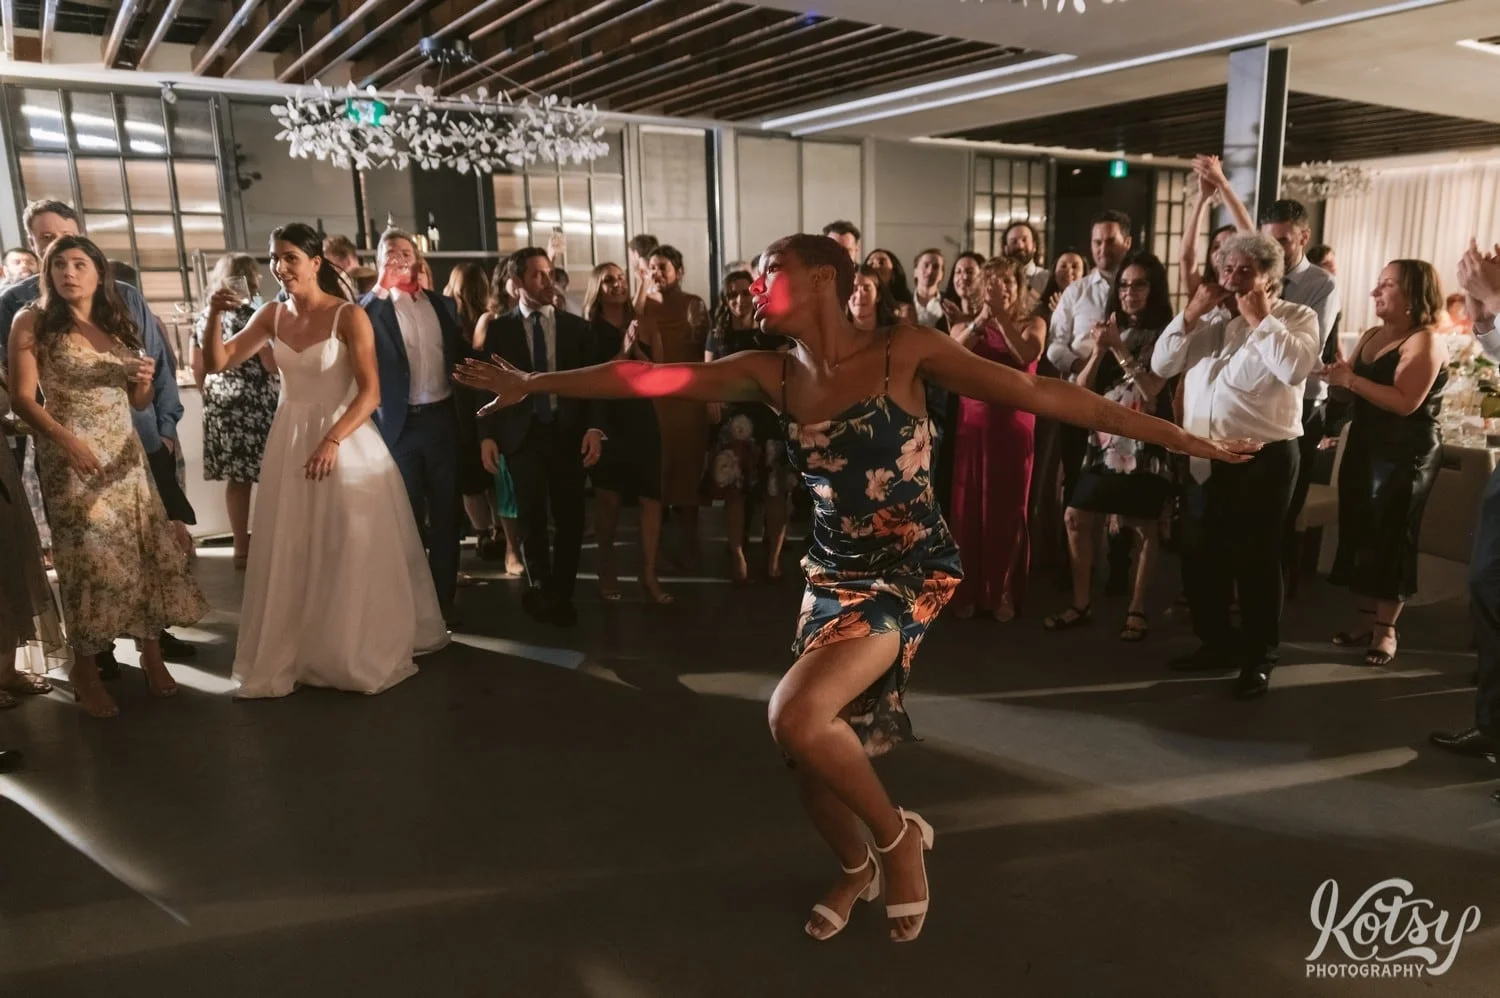 A woman dances with her arms wide out in front of a group of guests during a Village Loft wedding reception in Toronto, Canada